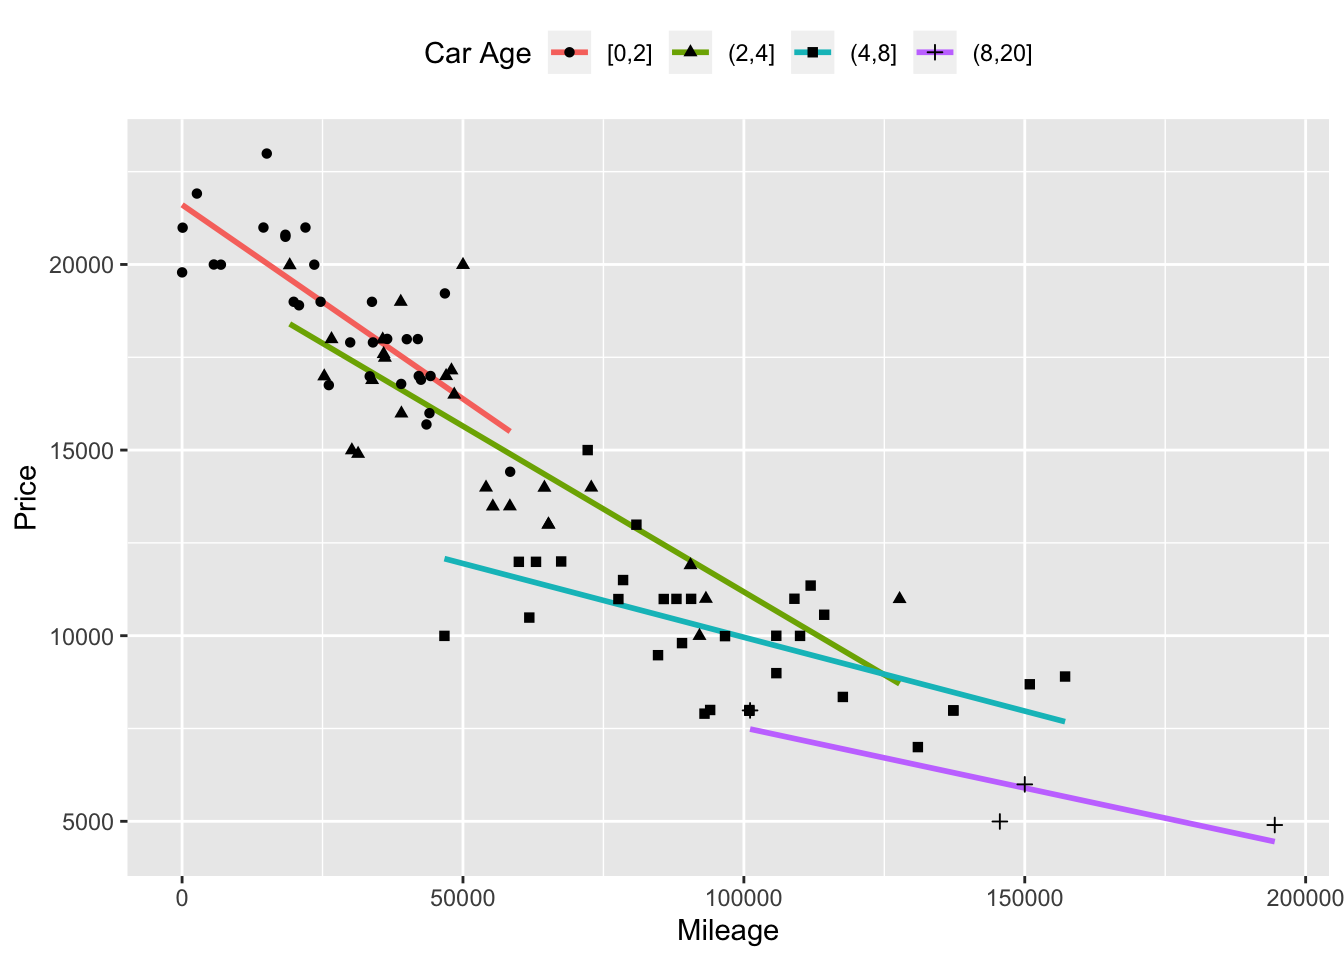 The relationship between price and mileage for cars in different age groups, indicating the partial relationship between price and mileage holding age constant.